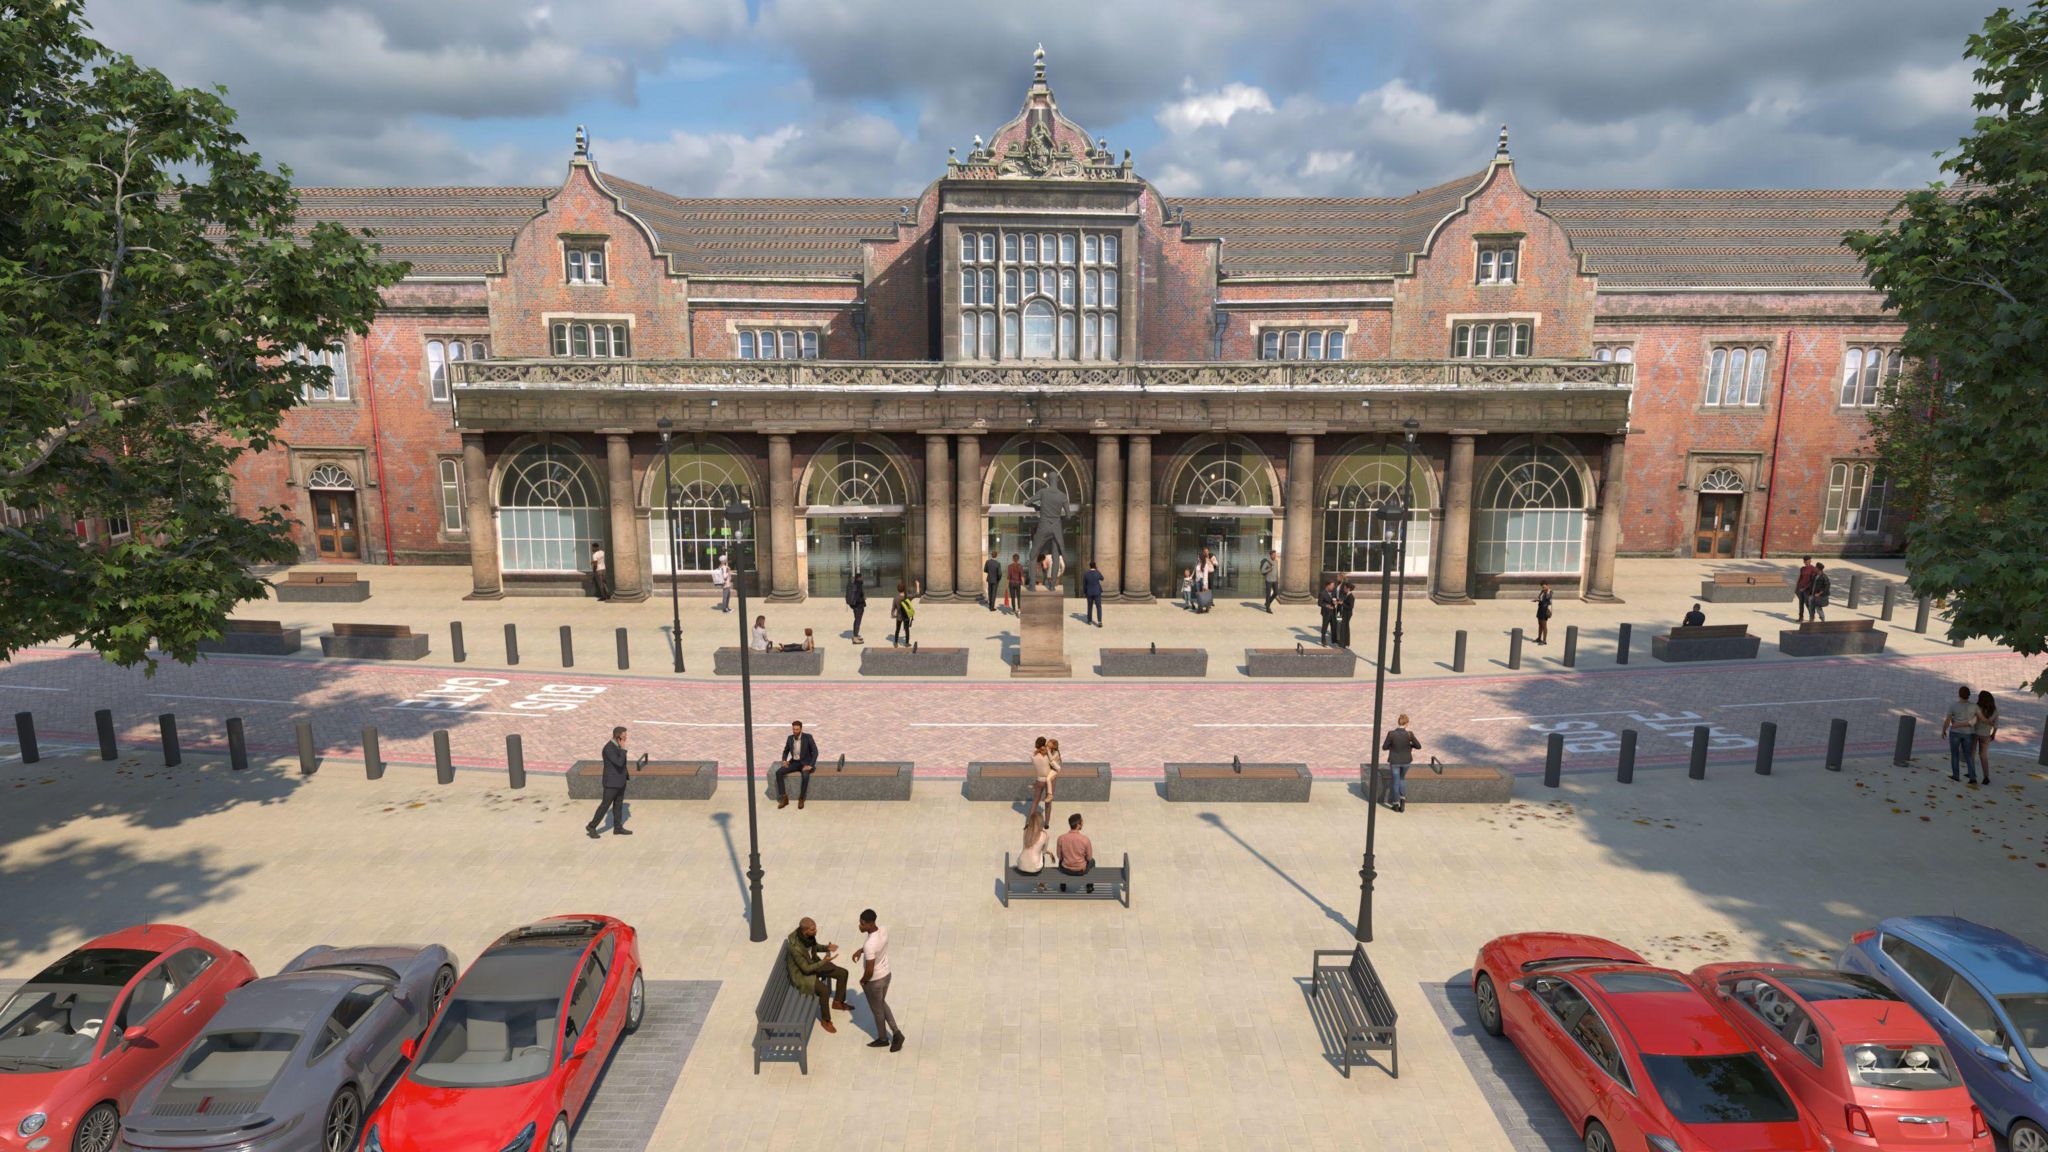 An artist's impression of how the new station approach will look